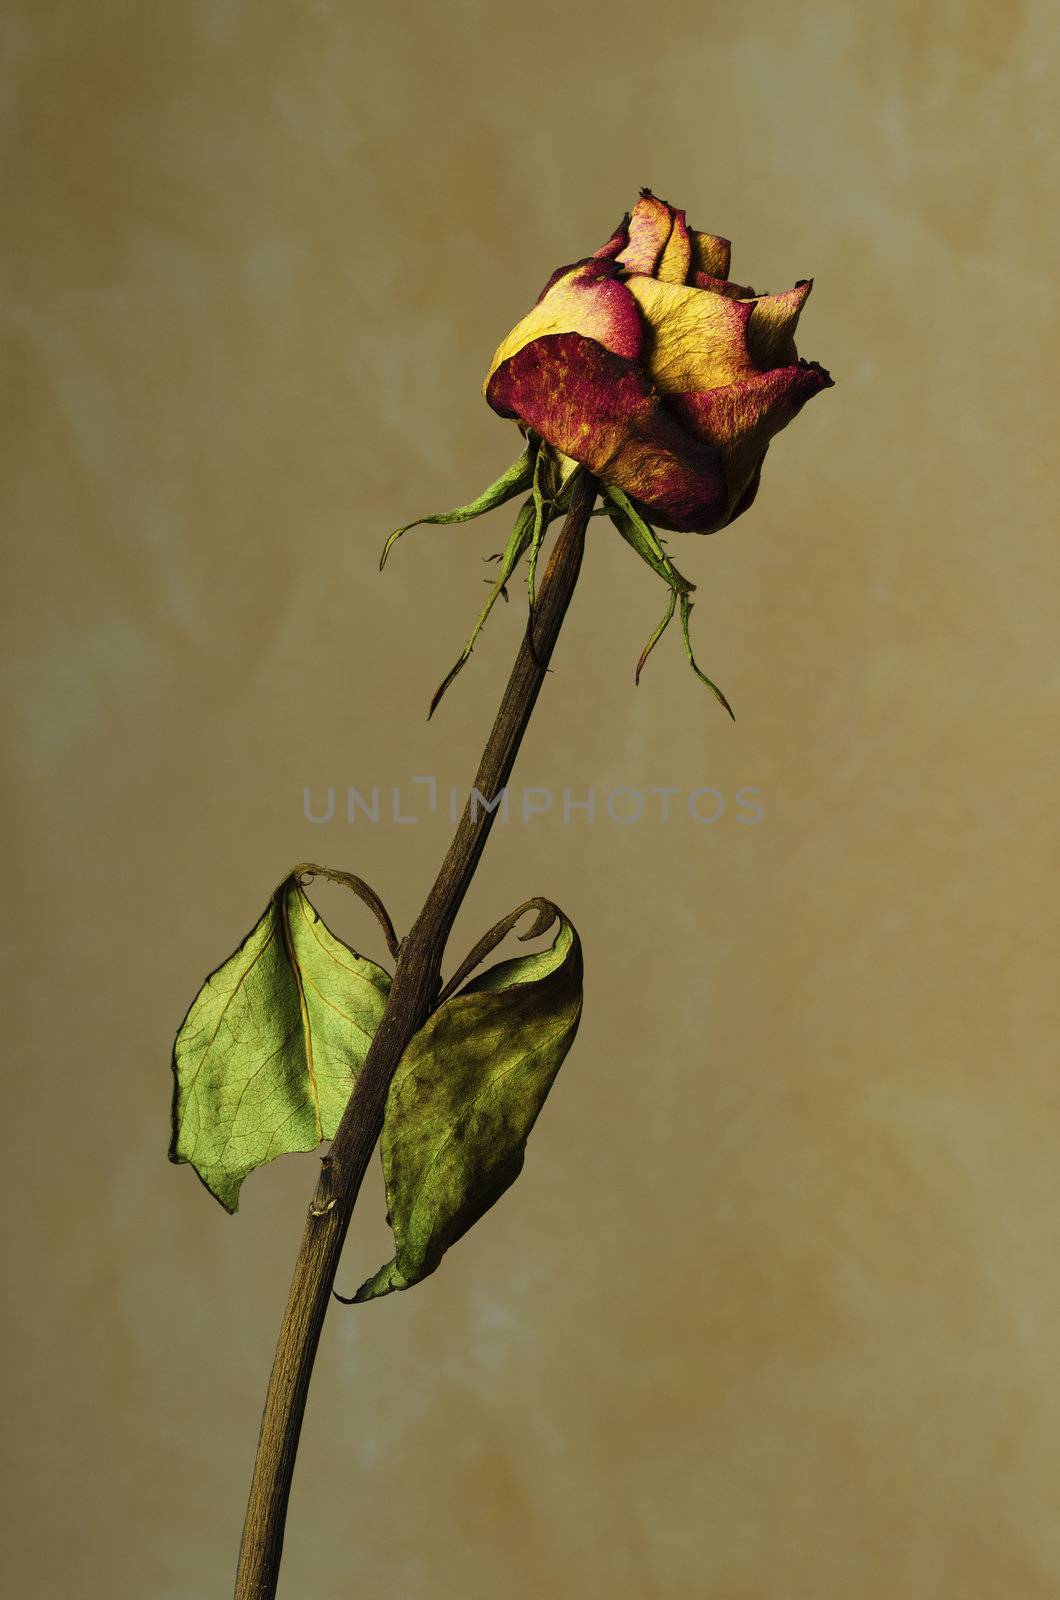 Withered rose on yellow textured background by nprause